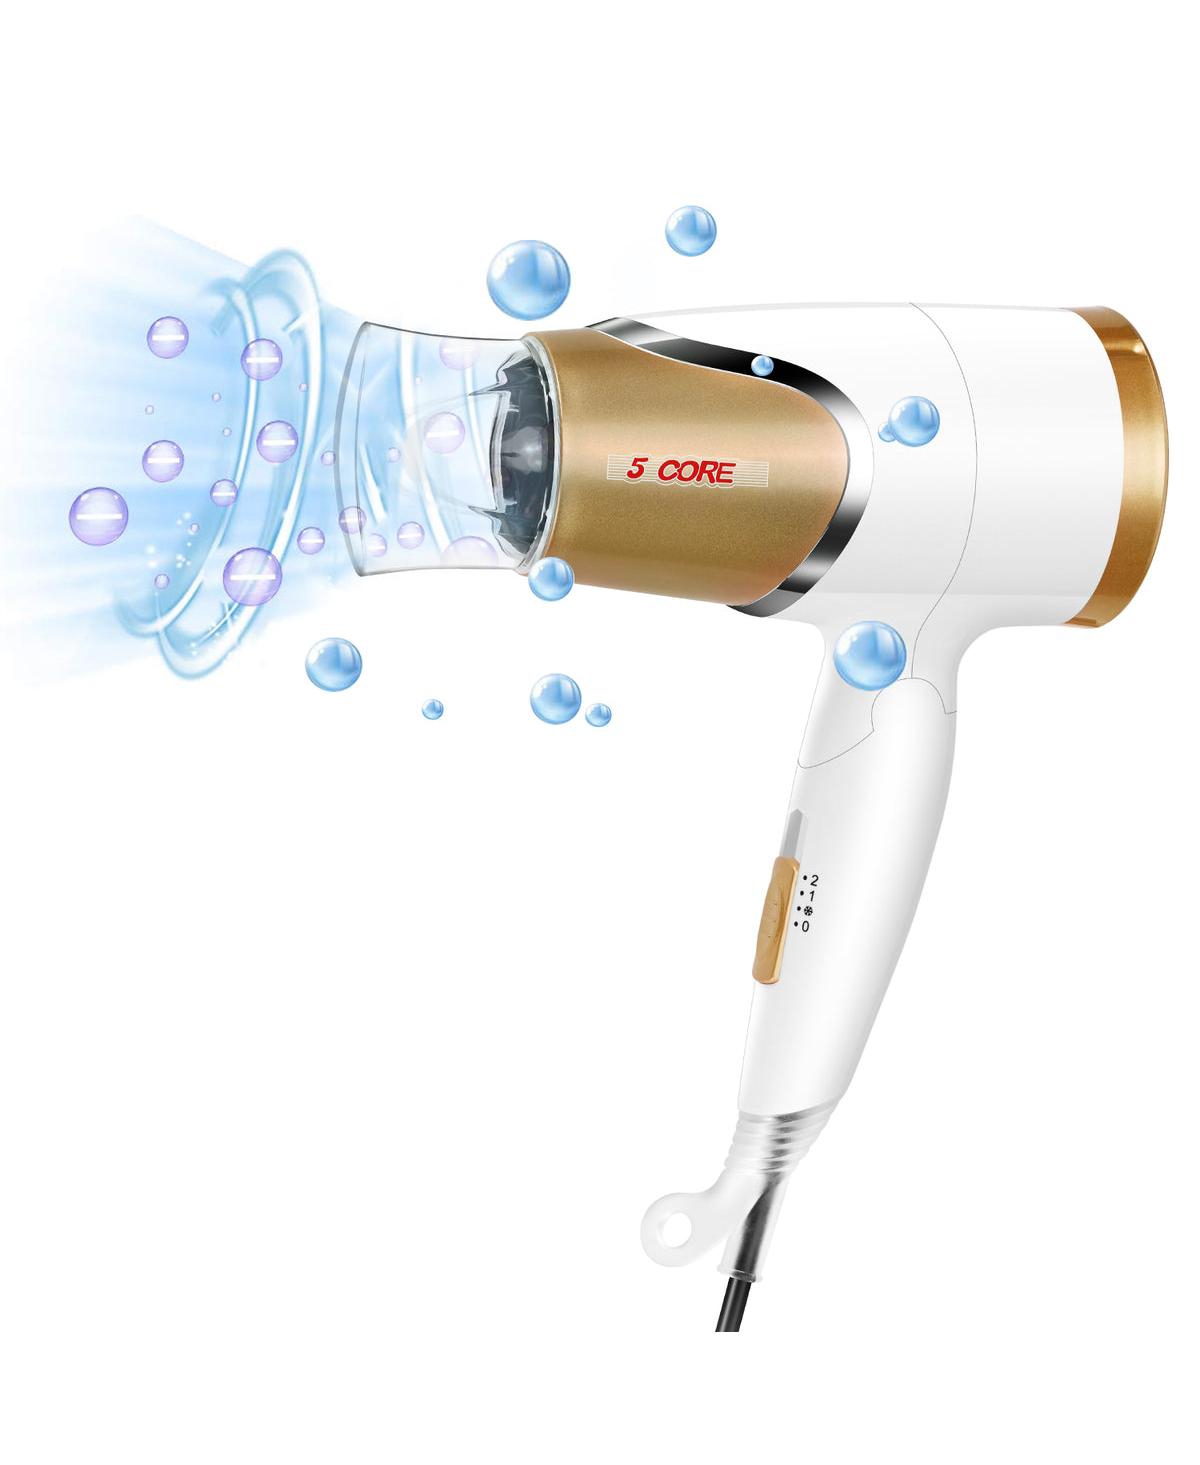 Hair Dryer with Diffuser 1875W Ac Motor Blow Dryers w Ceramic Technology â¢ Ionic Conditioning Hd F